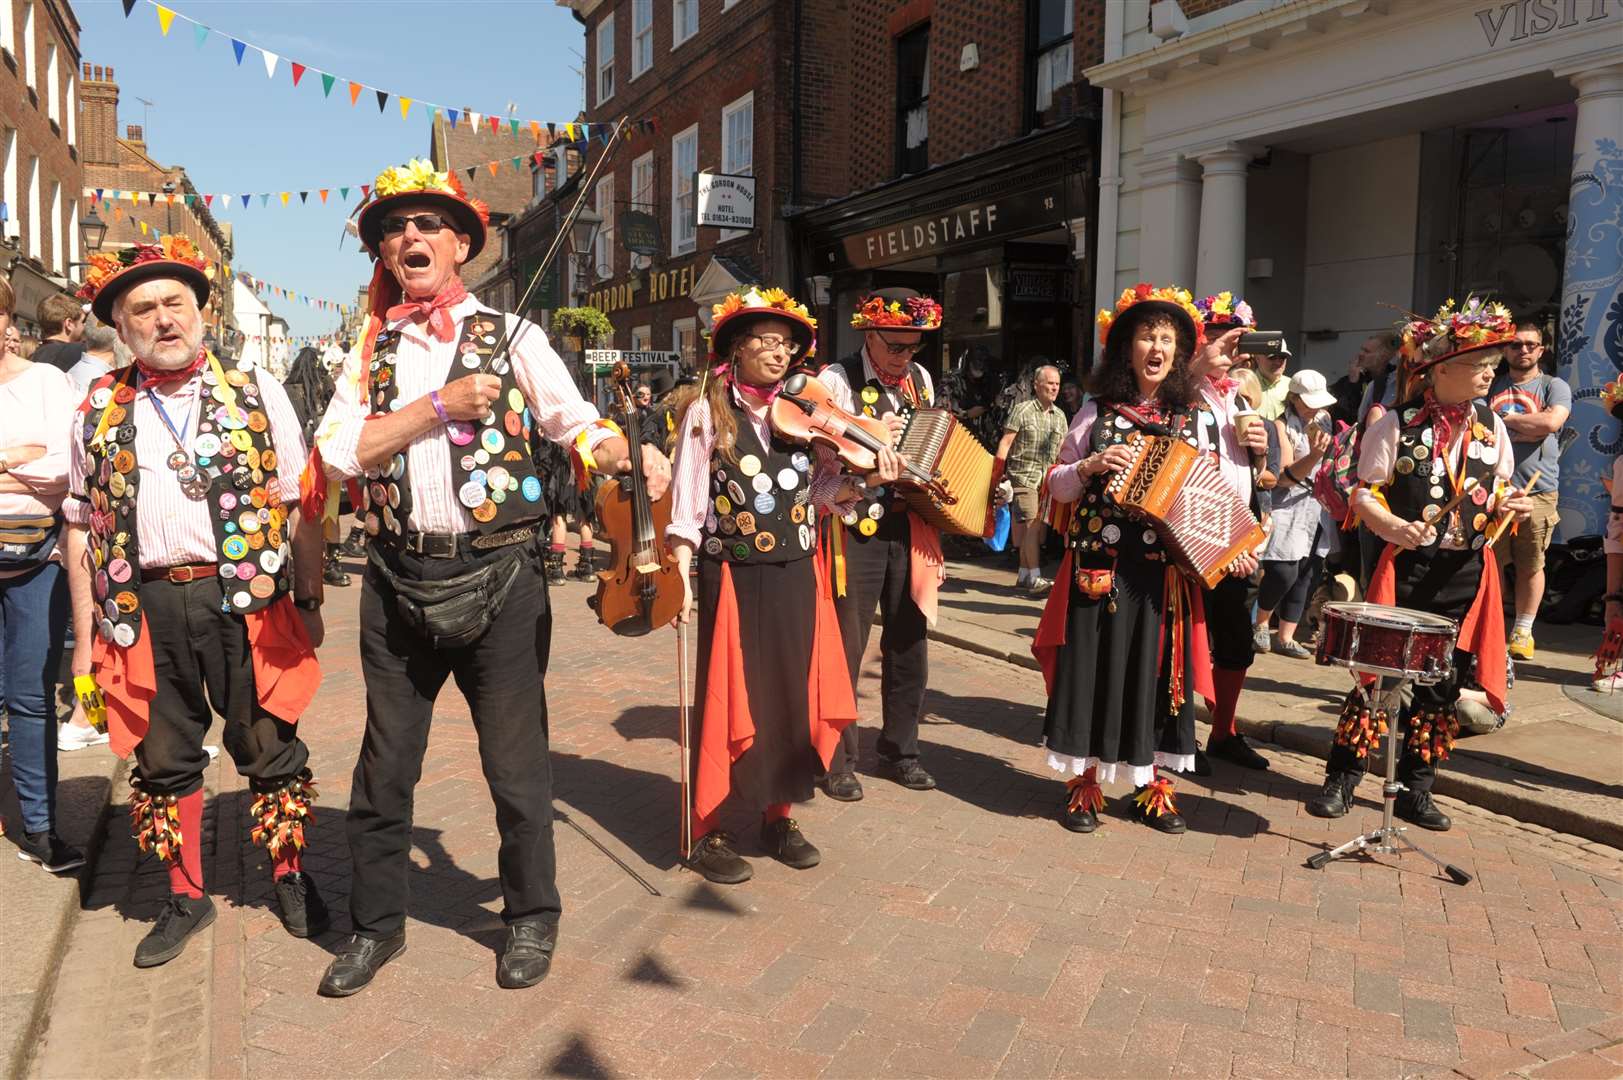 Rochester High Street during the Sweeps festival in 2018